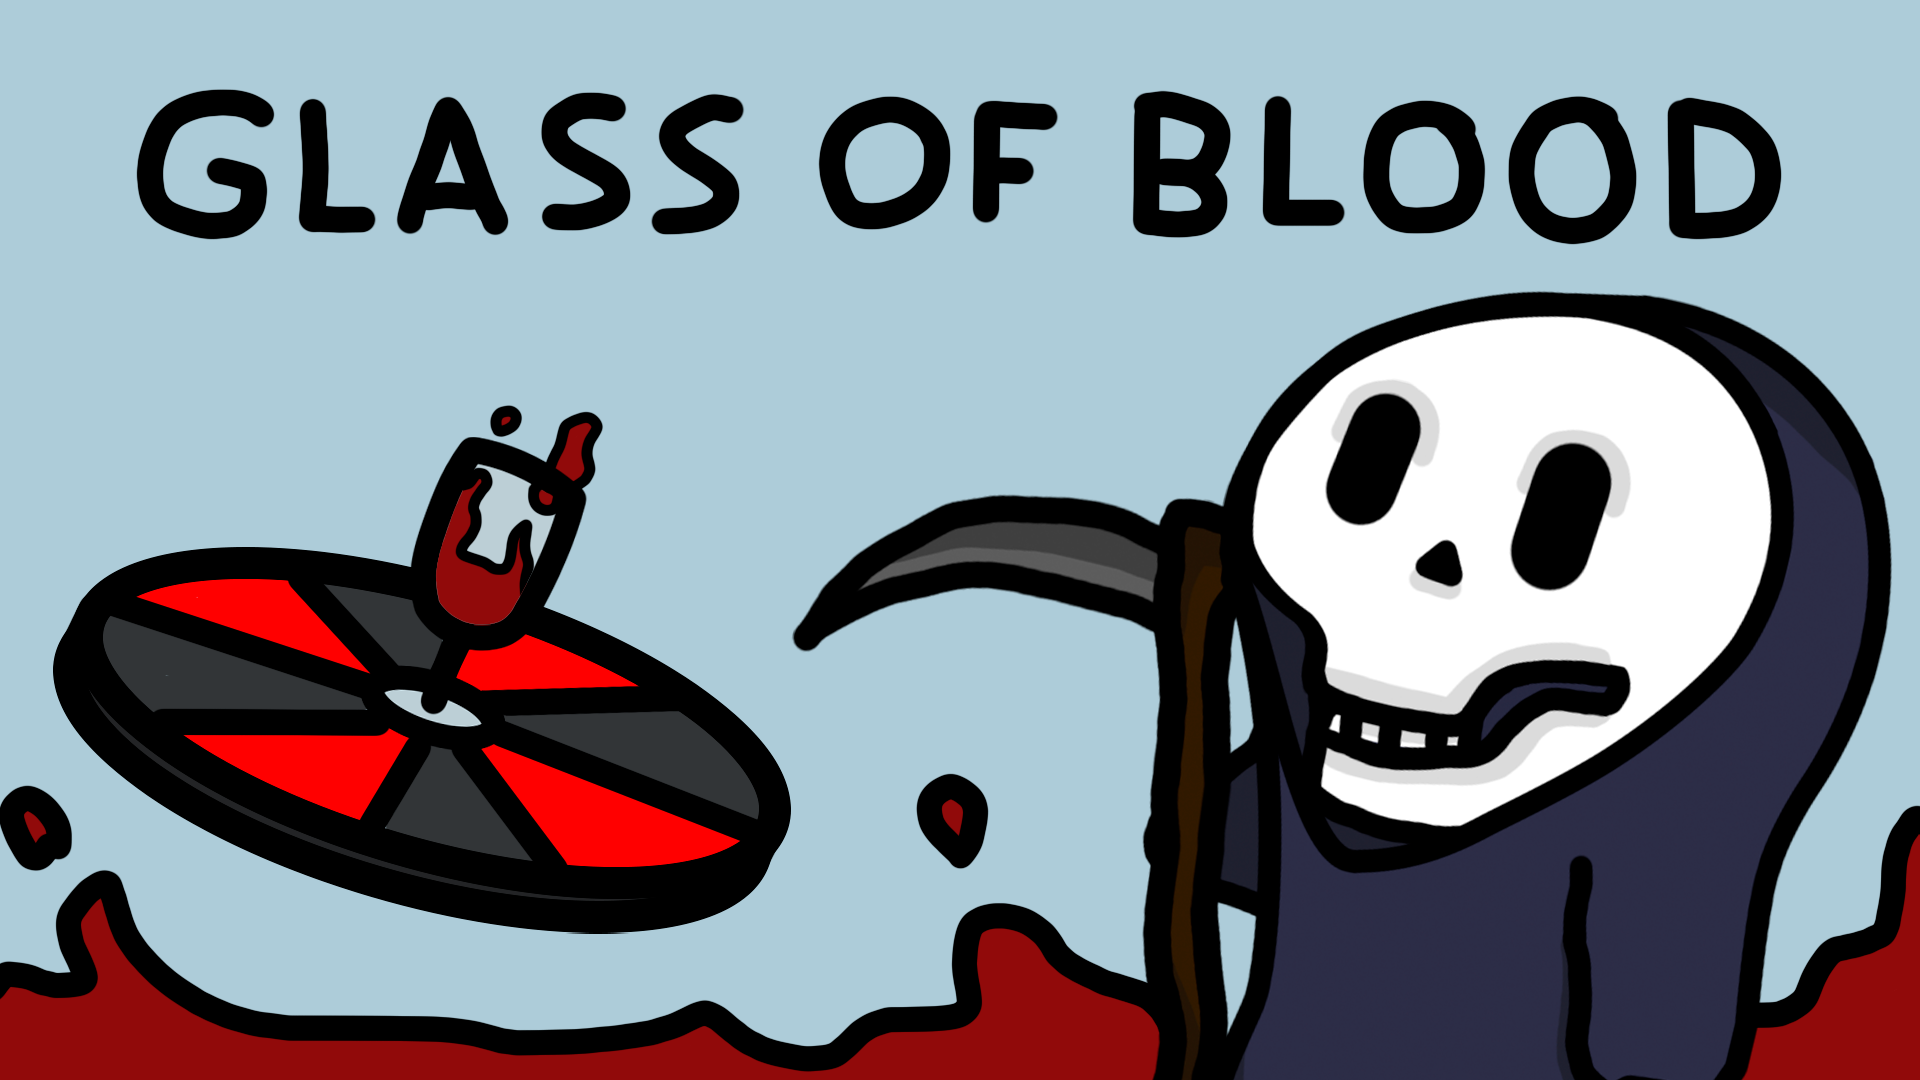 Glass of blood!